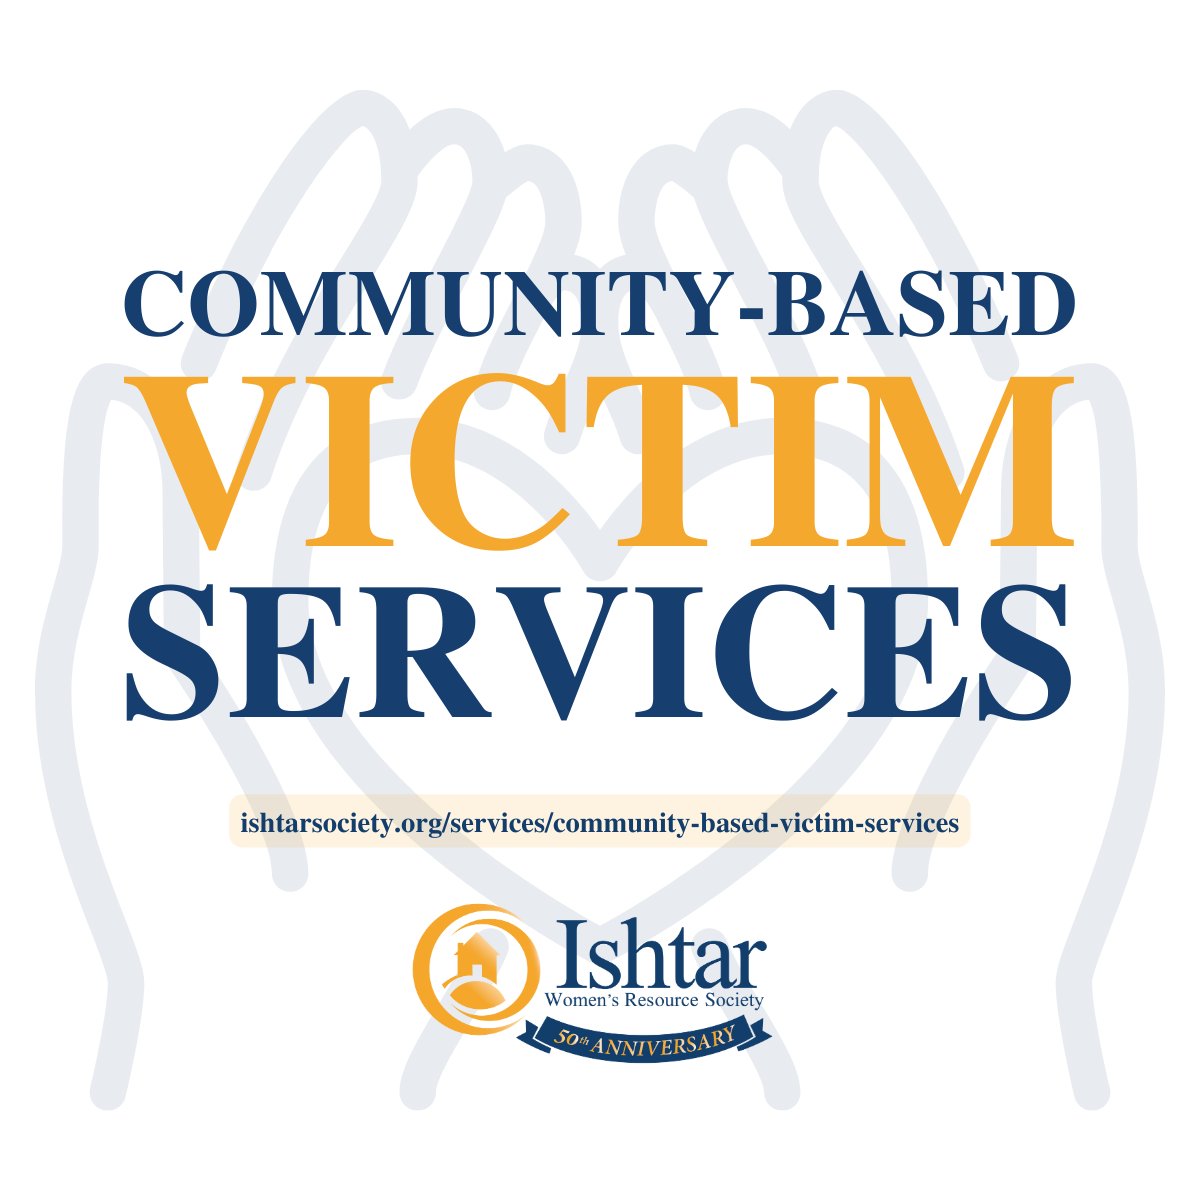 Ishtar offers #CommunityBased #VictimServices that include genuine, practical #help:
🧡Safety planning
🧡Filing a police report
🧡Liaising with Crown Counsel
🧡Referrals to community resources
🧡More . . .

Details: ishtarsociety.org/services/commu…

#DonateNow: canadahelps.org/en/dn/8604?v2=…